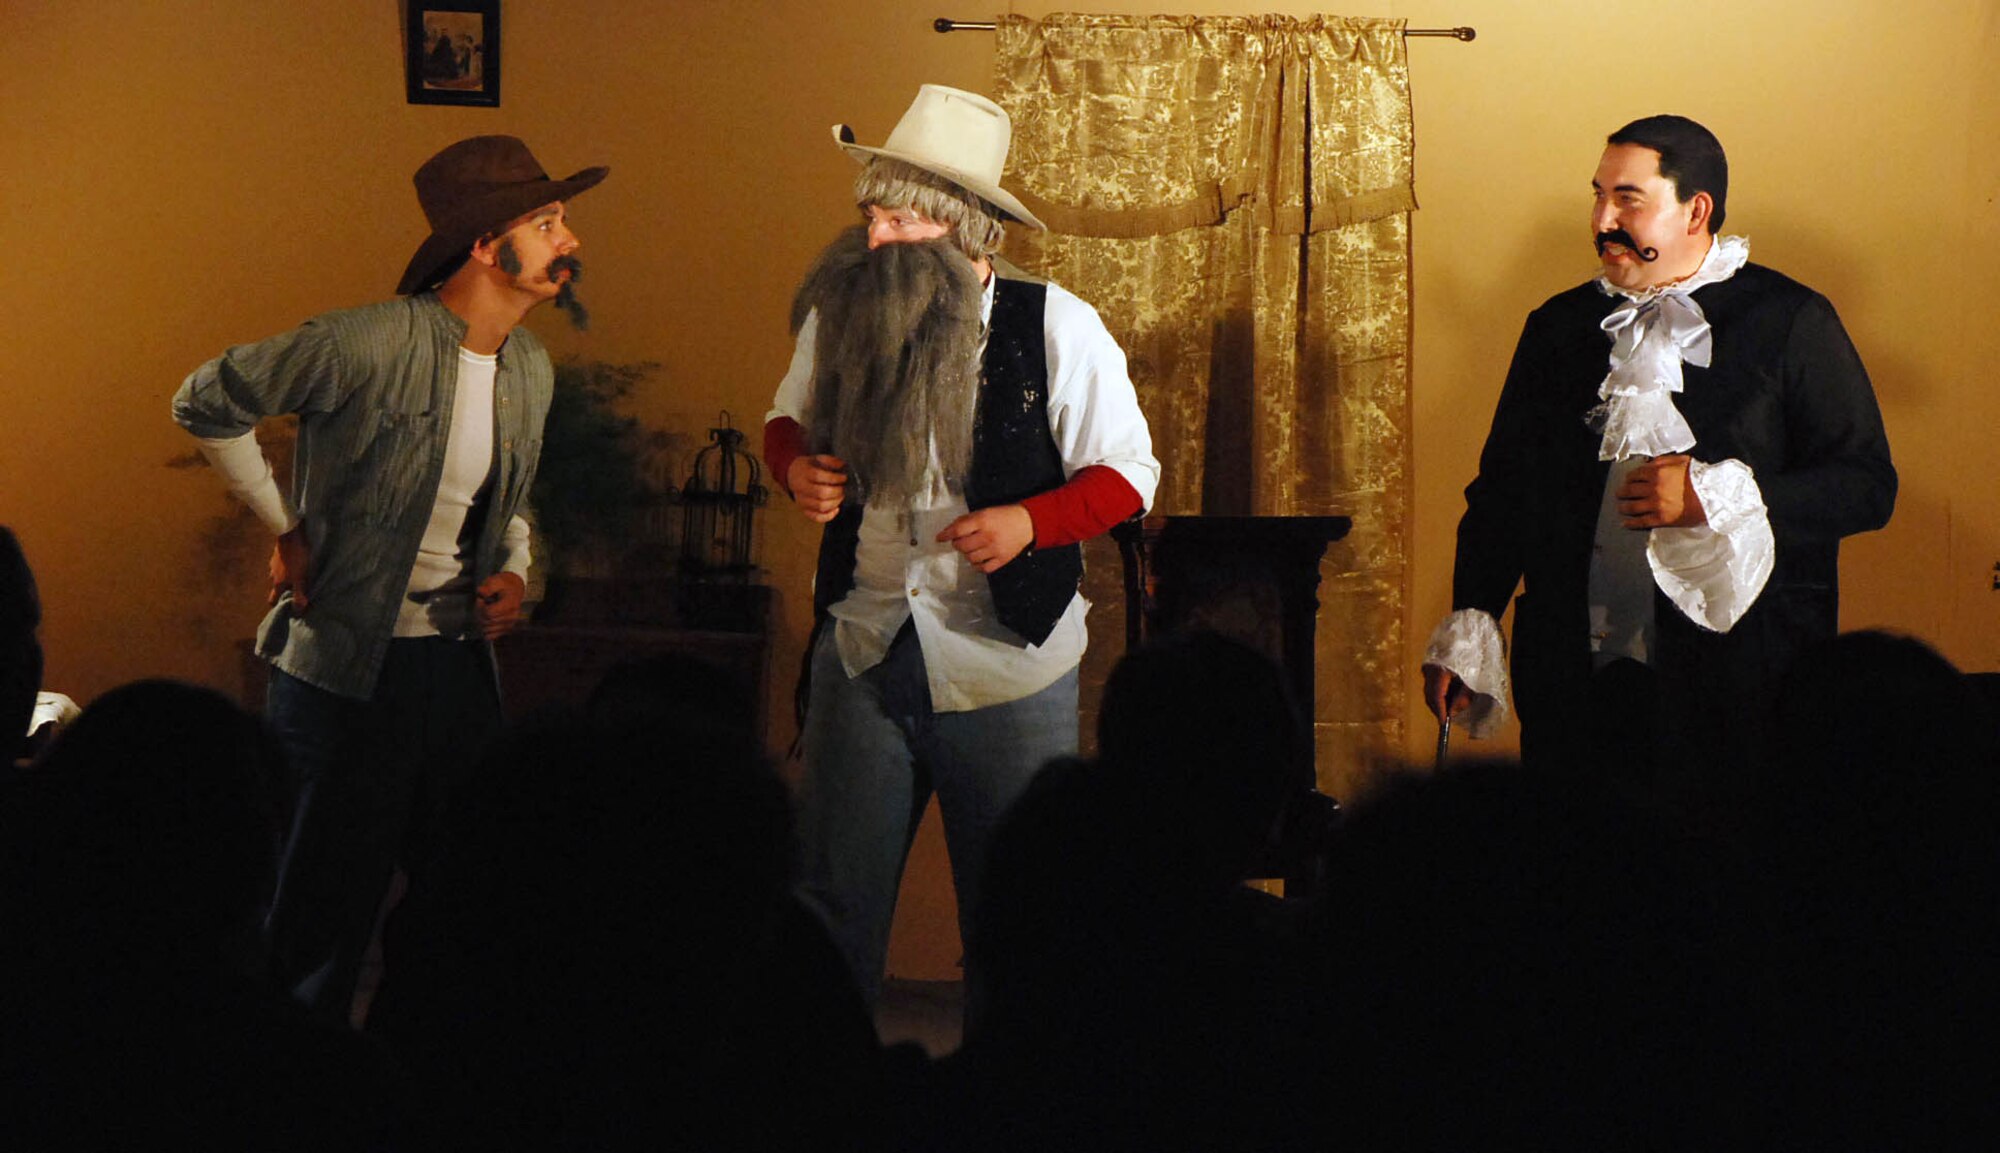 LAUGHLIN AIR FORCE BASE, Texas – Senior Airman Blake Lapp as Side Kick and Tech. Sgt. Keith Lewis as Ole Timer, both with the 47th Medical Operations Squadron, perform  a scene in the “Shame of Tombstone” melodrama put on by the Whitehead Museum in downtown Del Rio recently. (U.S. Air Force photo by Airman 1st Class Sara Csurilla)